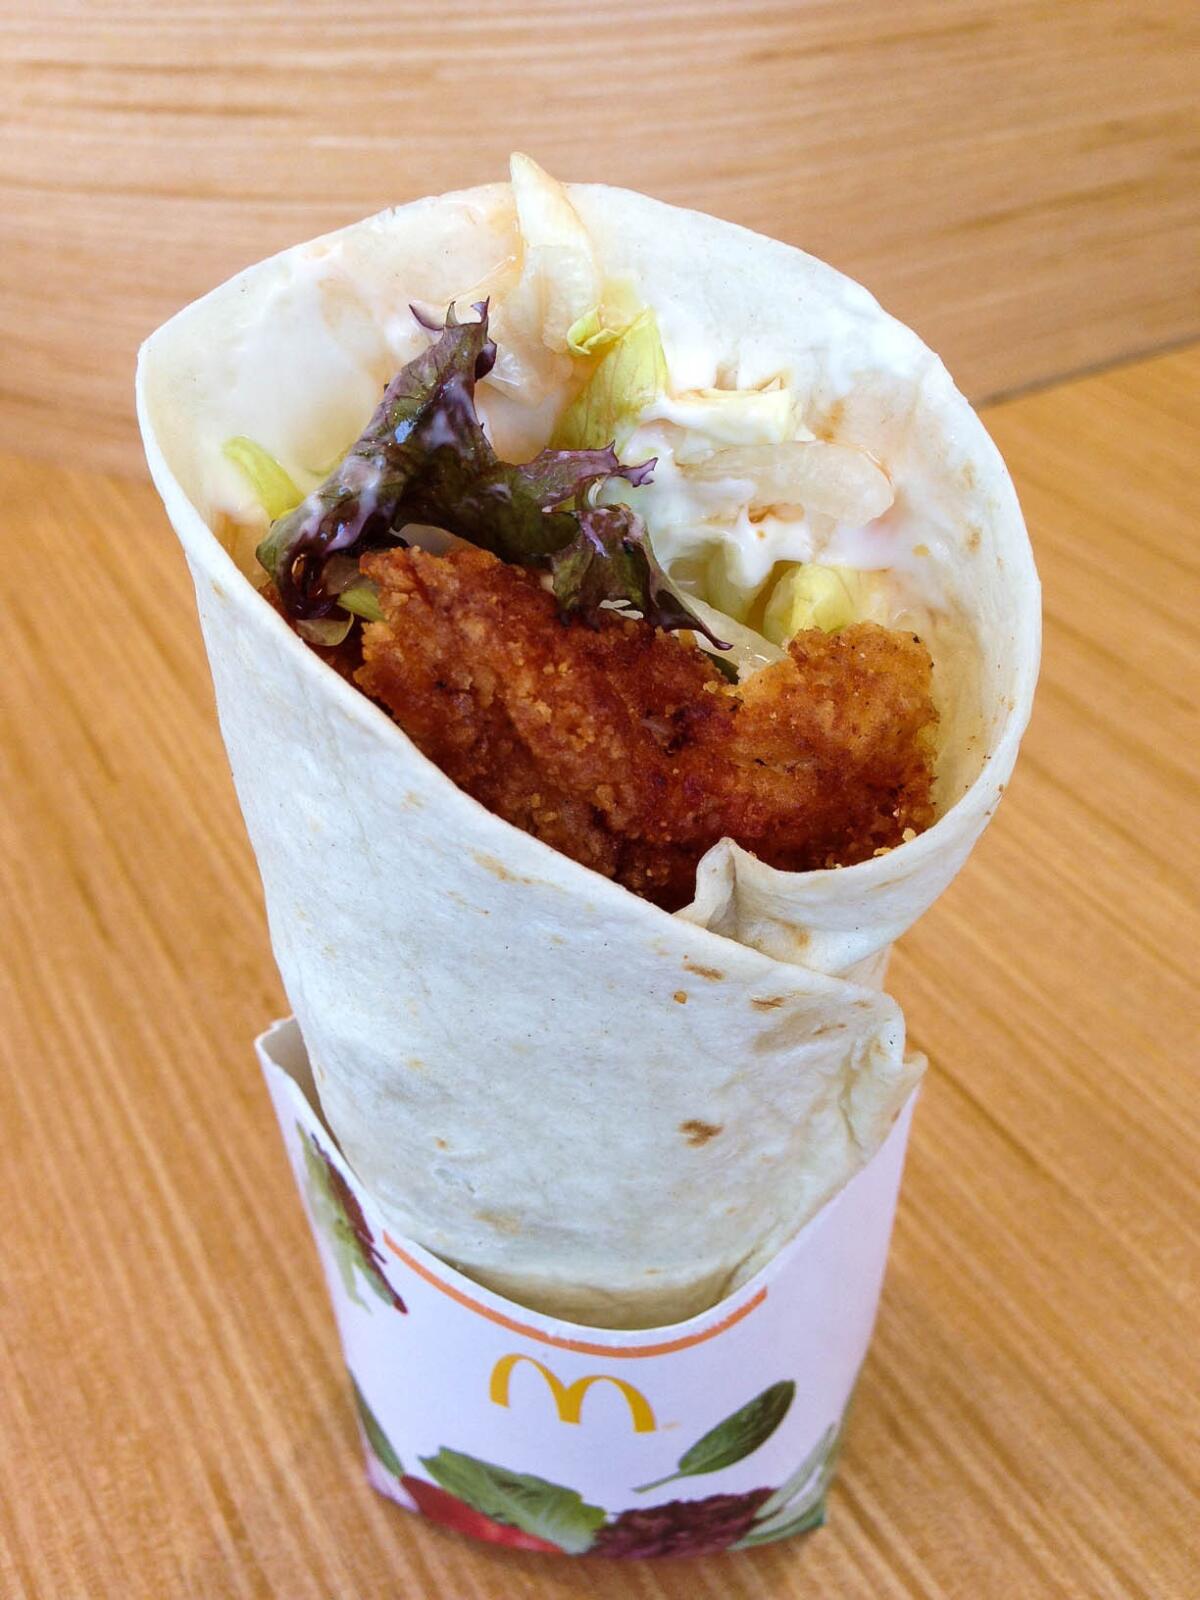 All three of McDonald's new Premium McWrap sandwiches are made with chicken that can be ordered crispy or grilled. Above, the crispy Sweet Chili Chicken version.